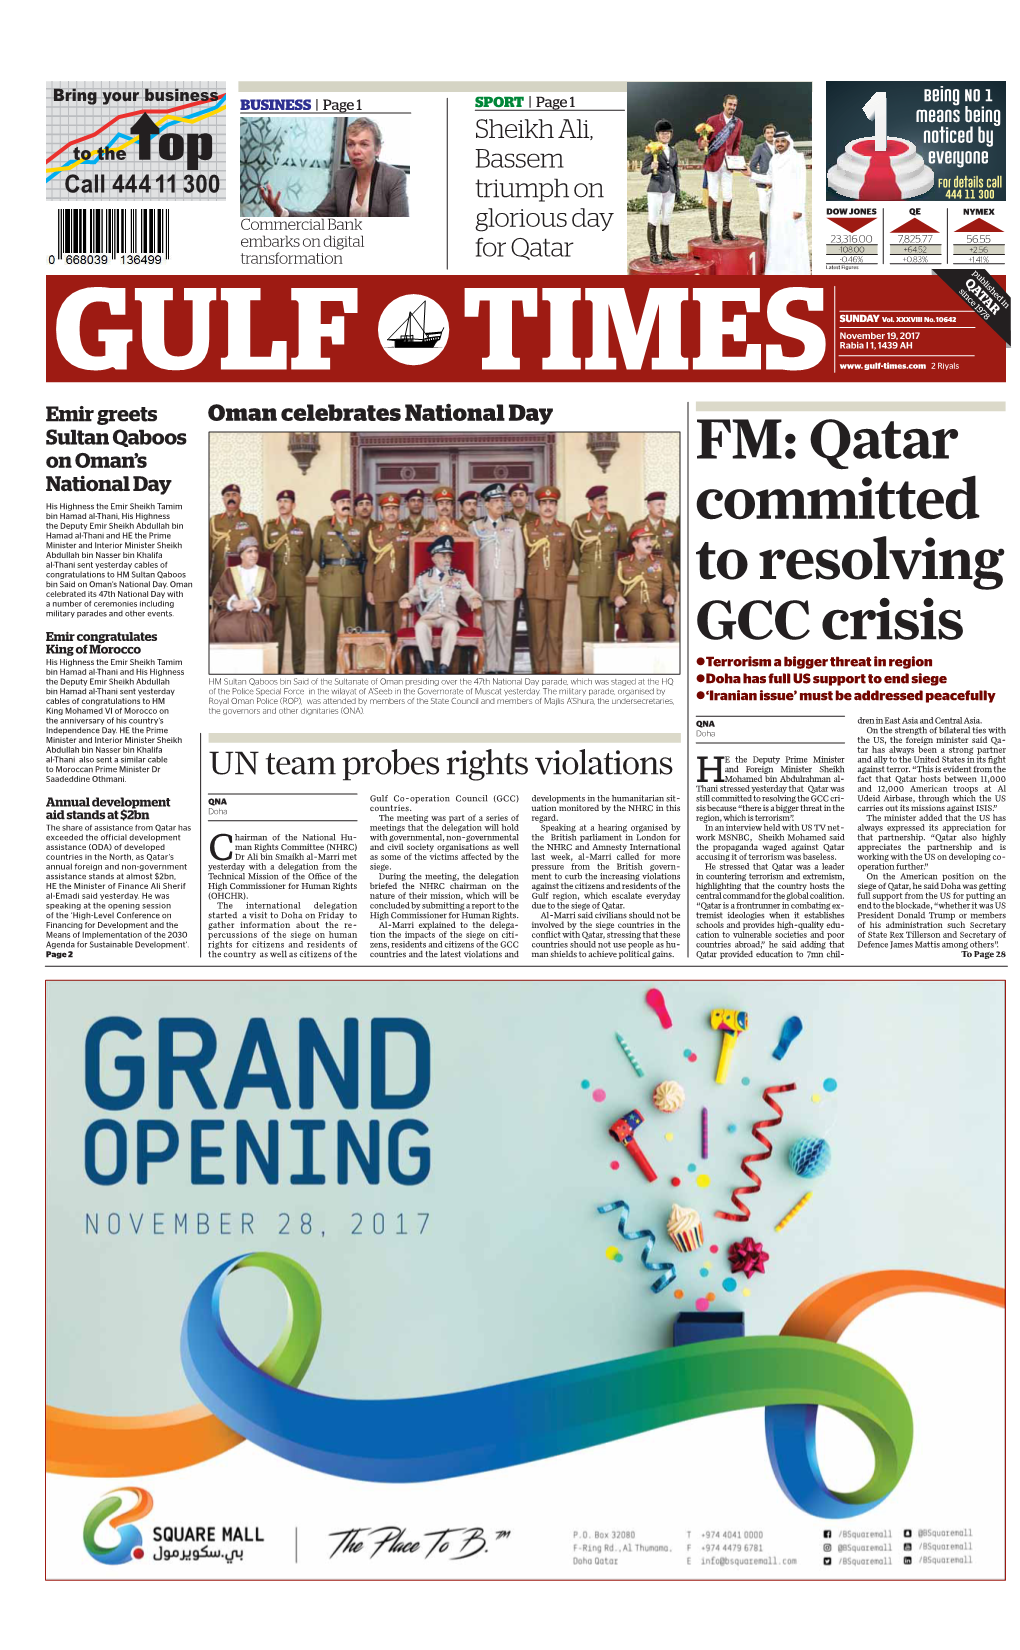 FM: Qatar Committed to Resolving GCC Crisis